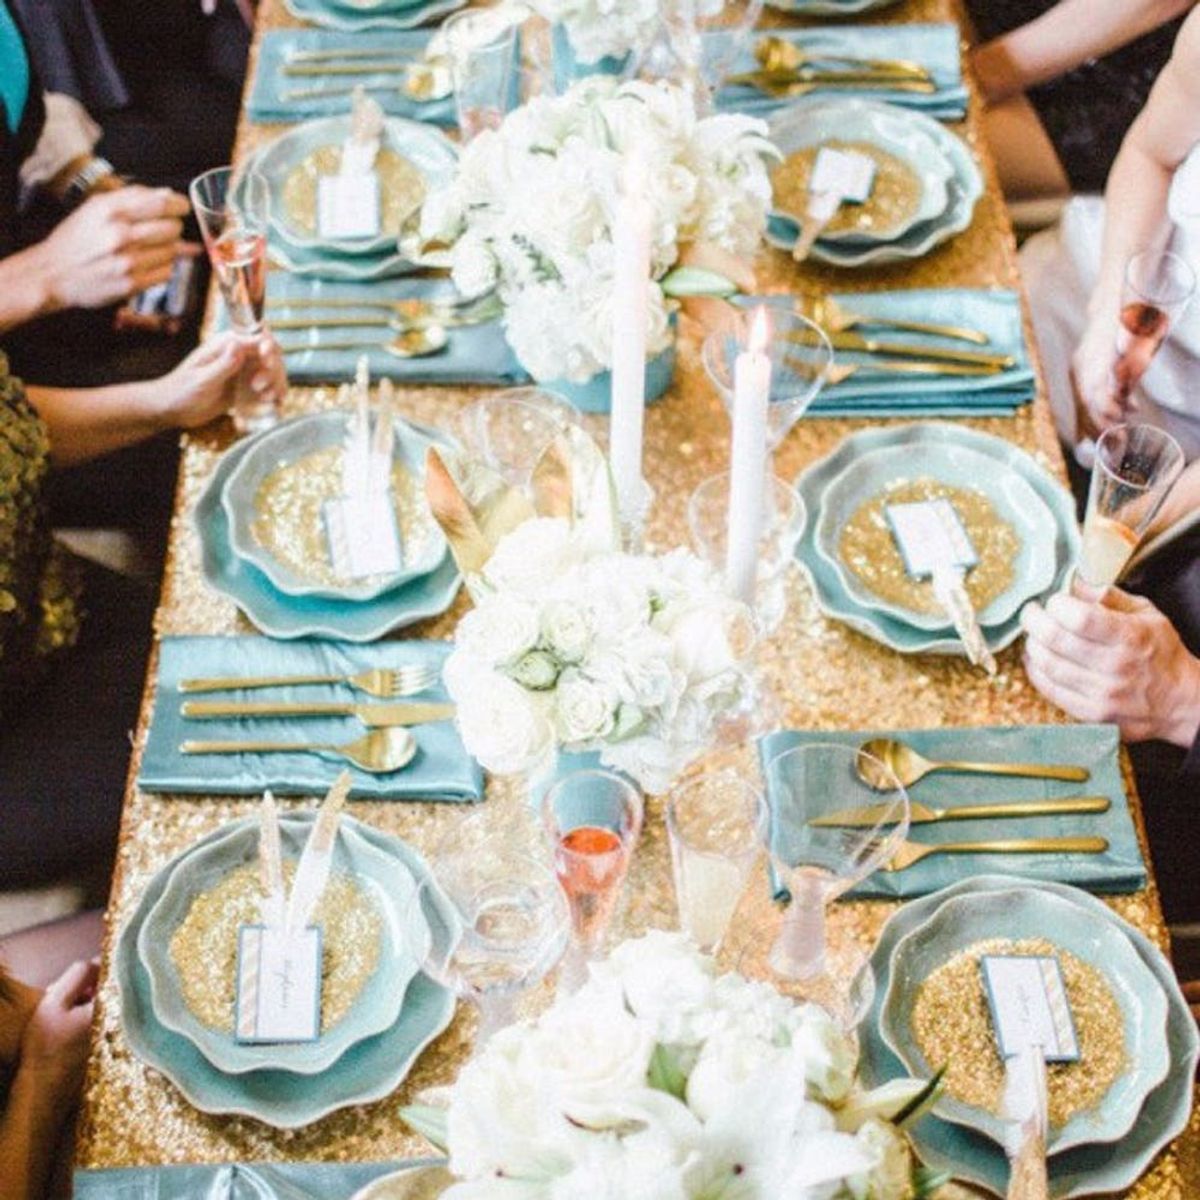 10 Ways to Trick Out Your NYE Table